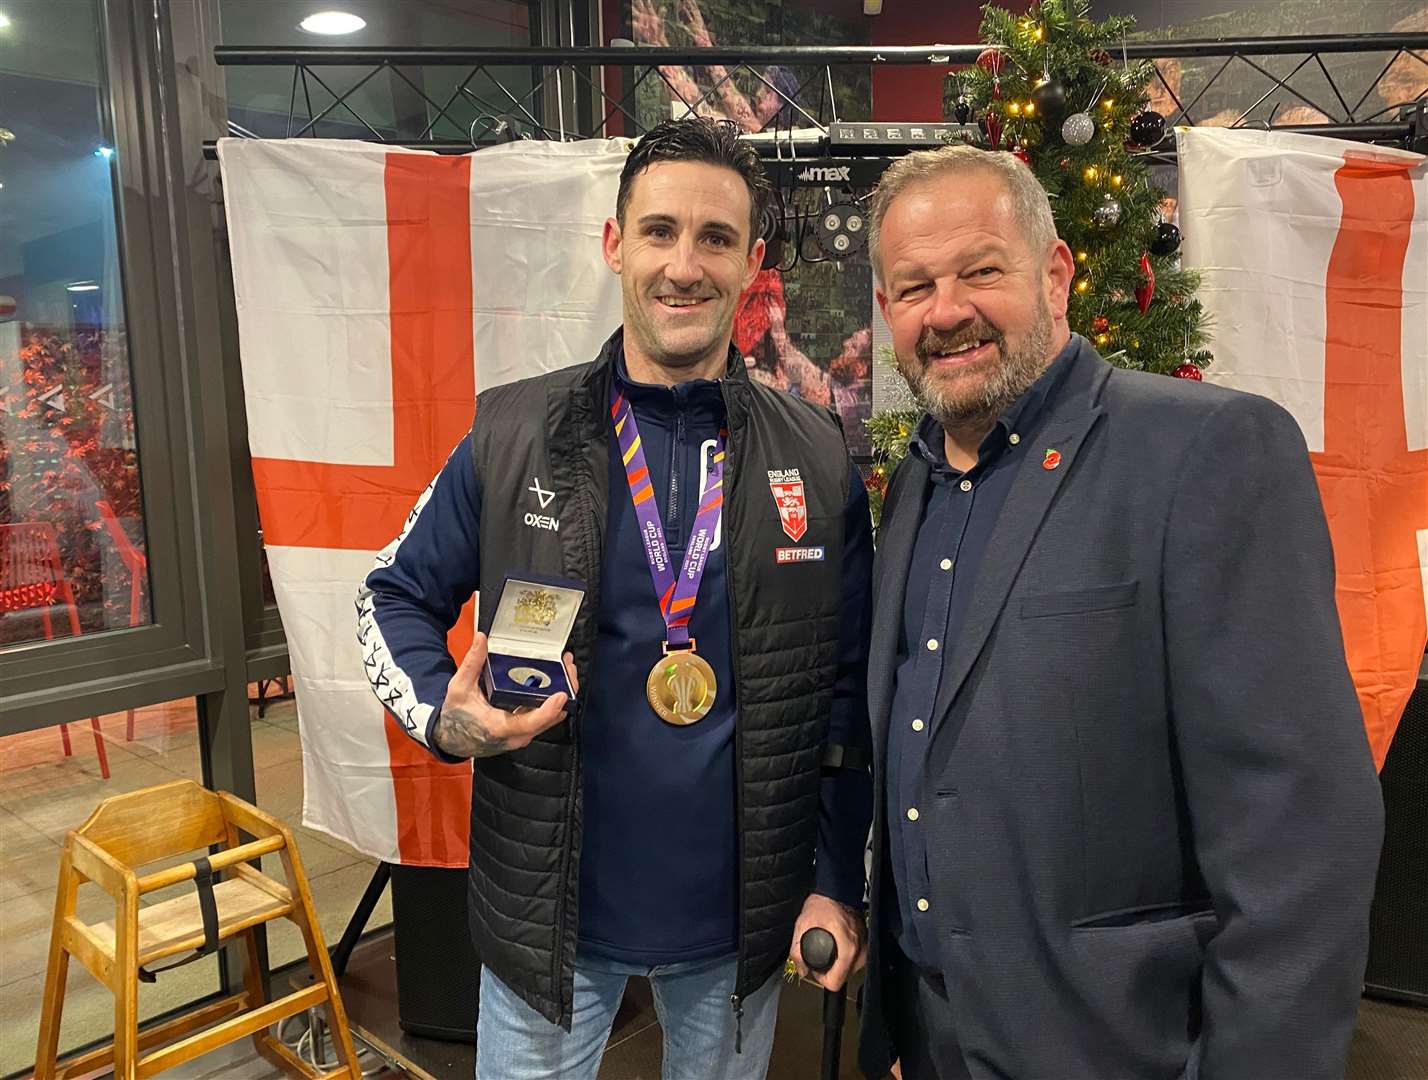 Wheelchair Rugby League World Cup winner Lewis King displays his award and World Cup winner's medal alongside Cllr Chris Shippam. Photo: Dartford council